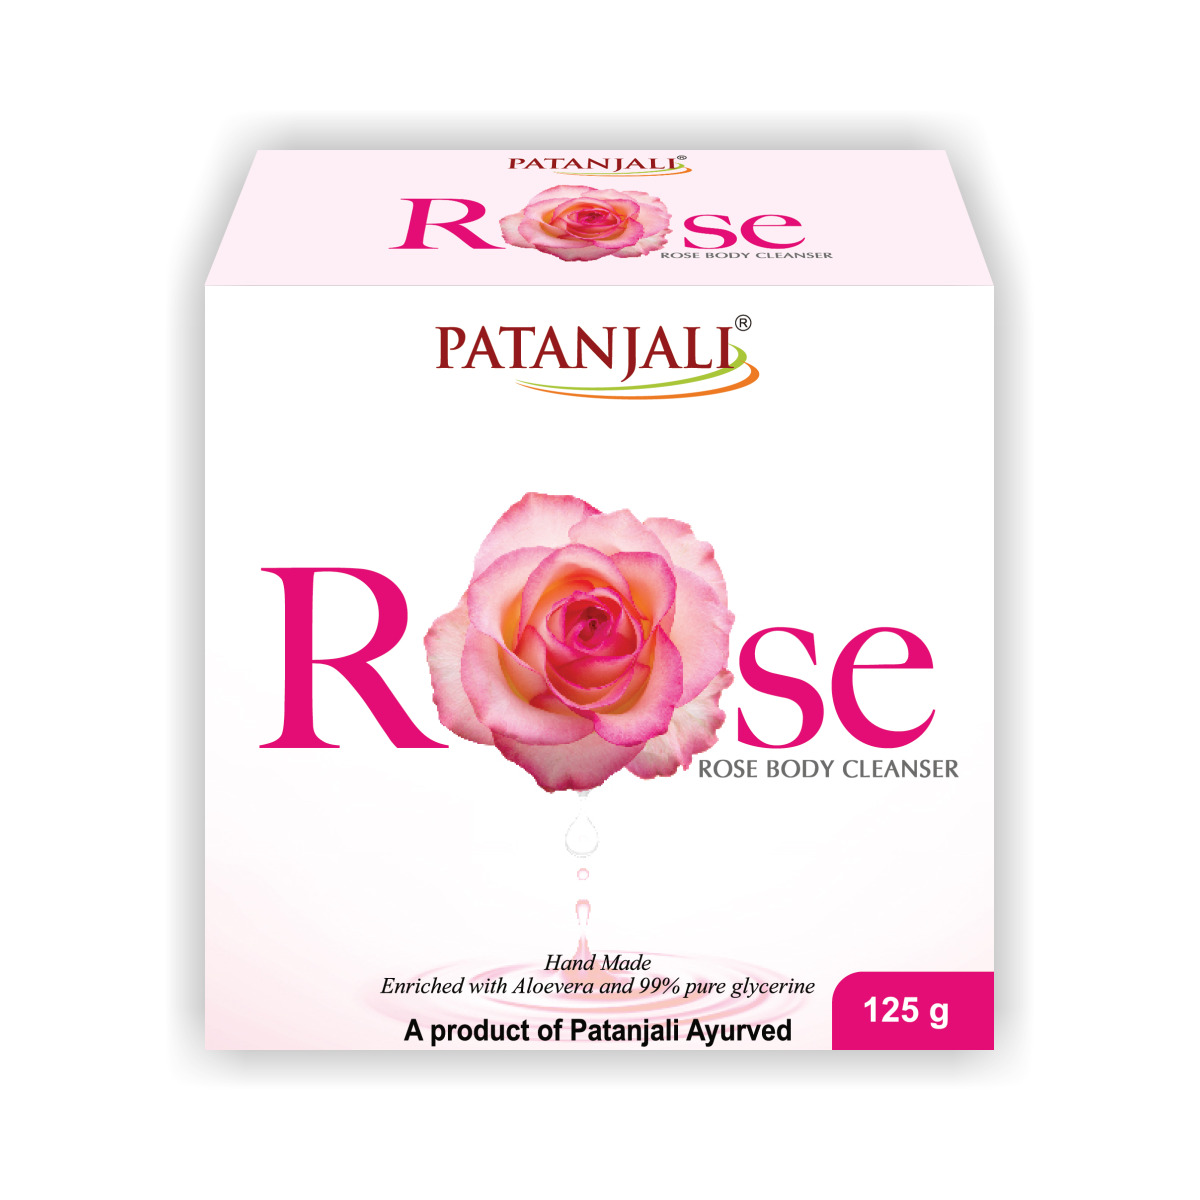 Patanjali Rose Body Cleanser